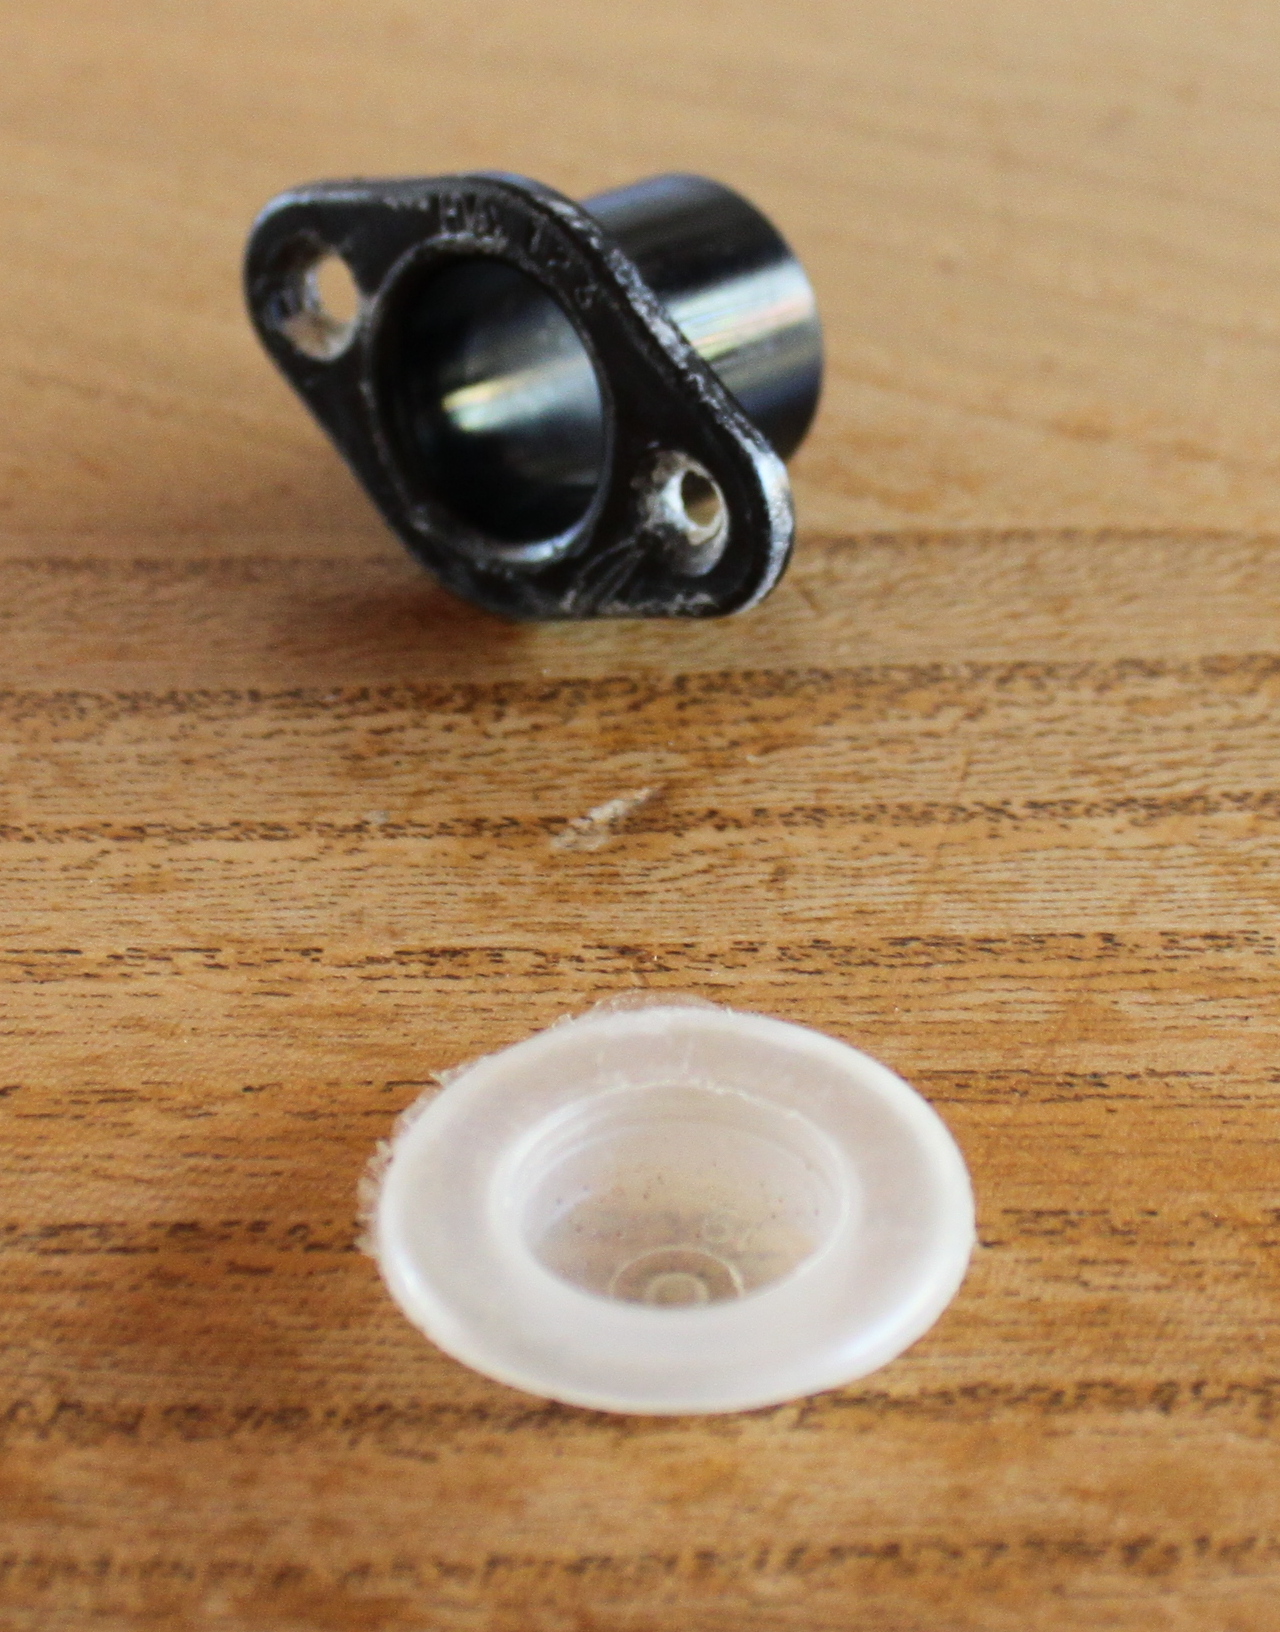 A drainage hole fitting with semi-transparent cap